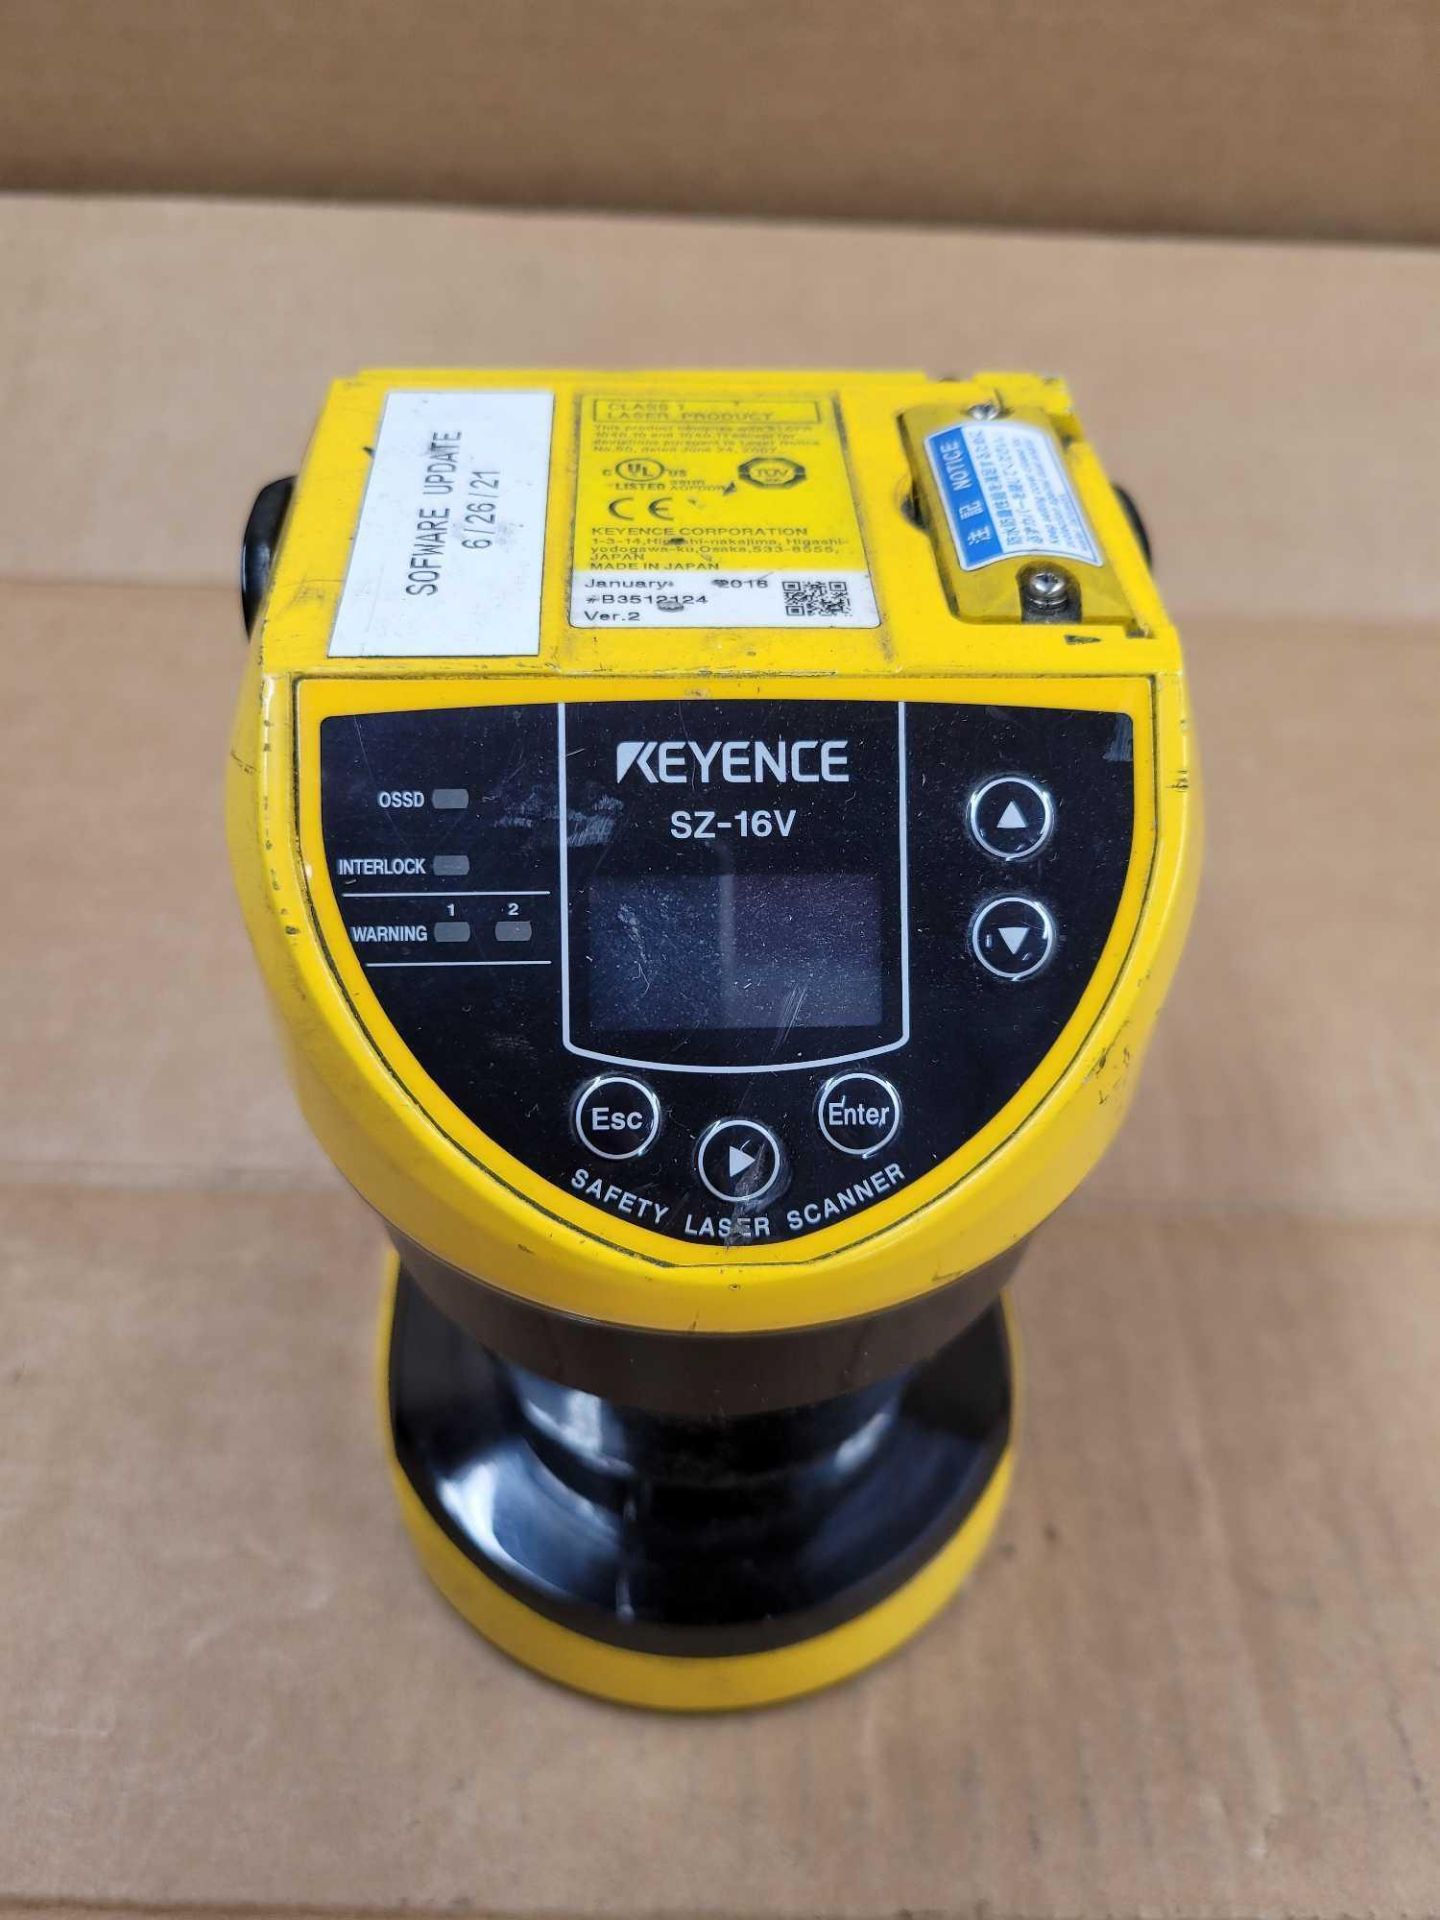 KEYENCE SZ-16V / Safety Laser Scanner  /  Lot Weight: 4.2 lbs - Image 2 of 7